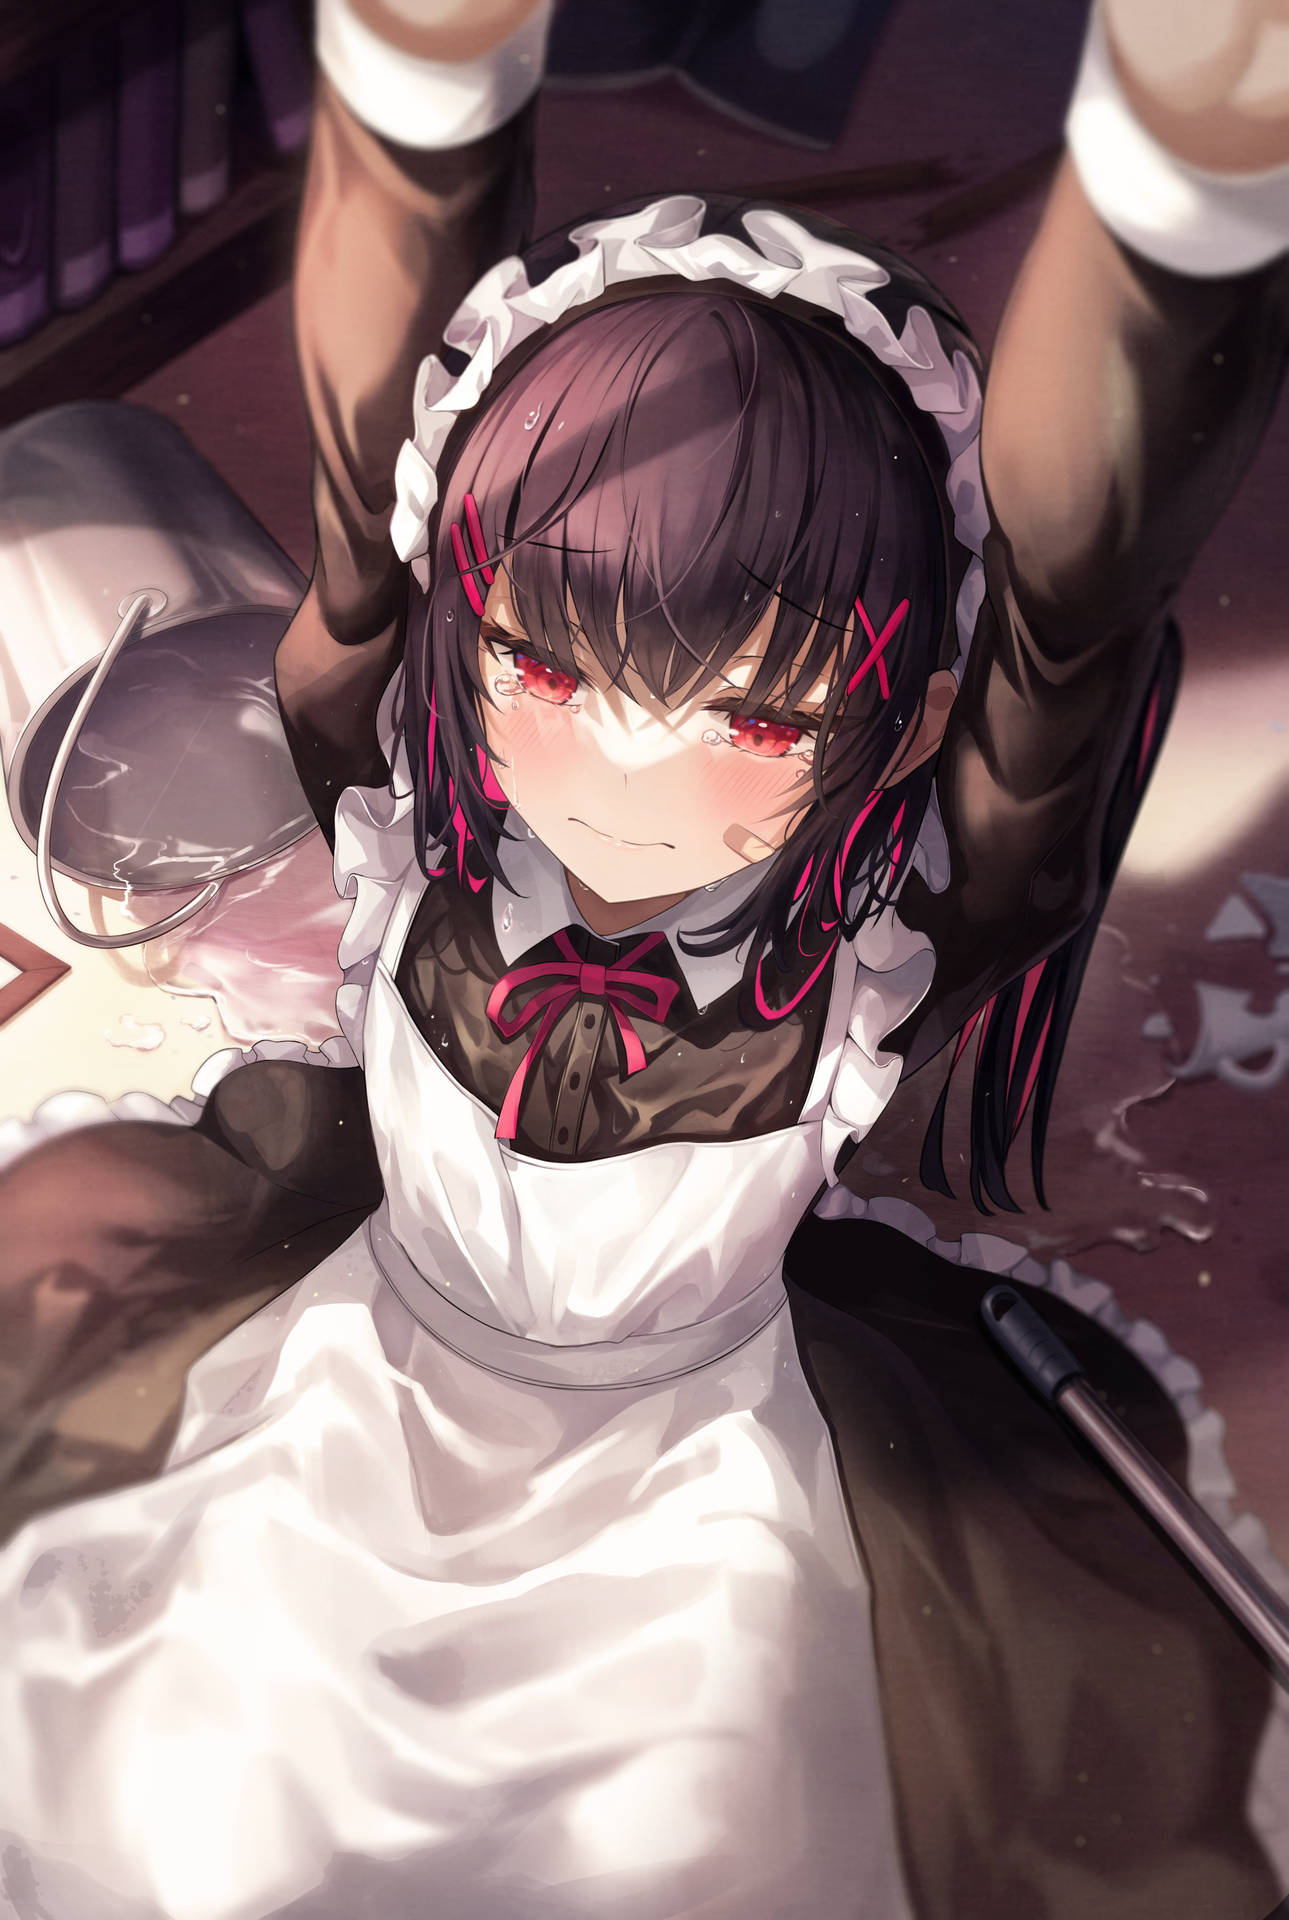 Heart-touching Anime Waifu In Maid Outfit Expressing Emotion